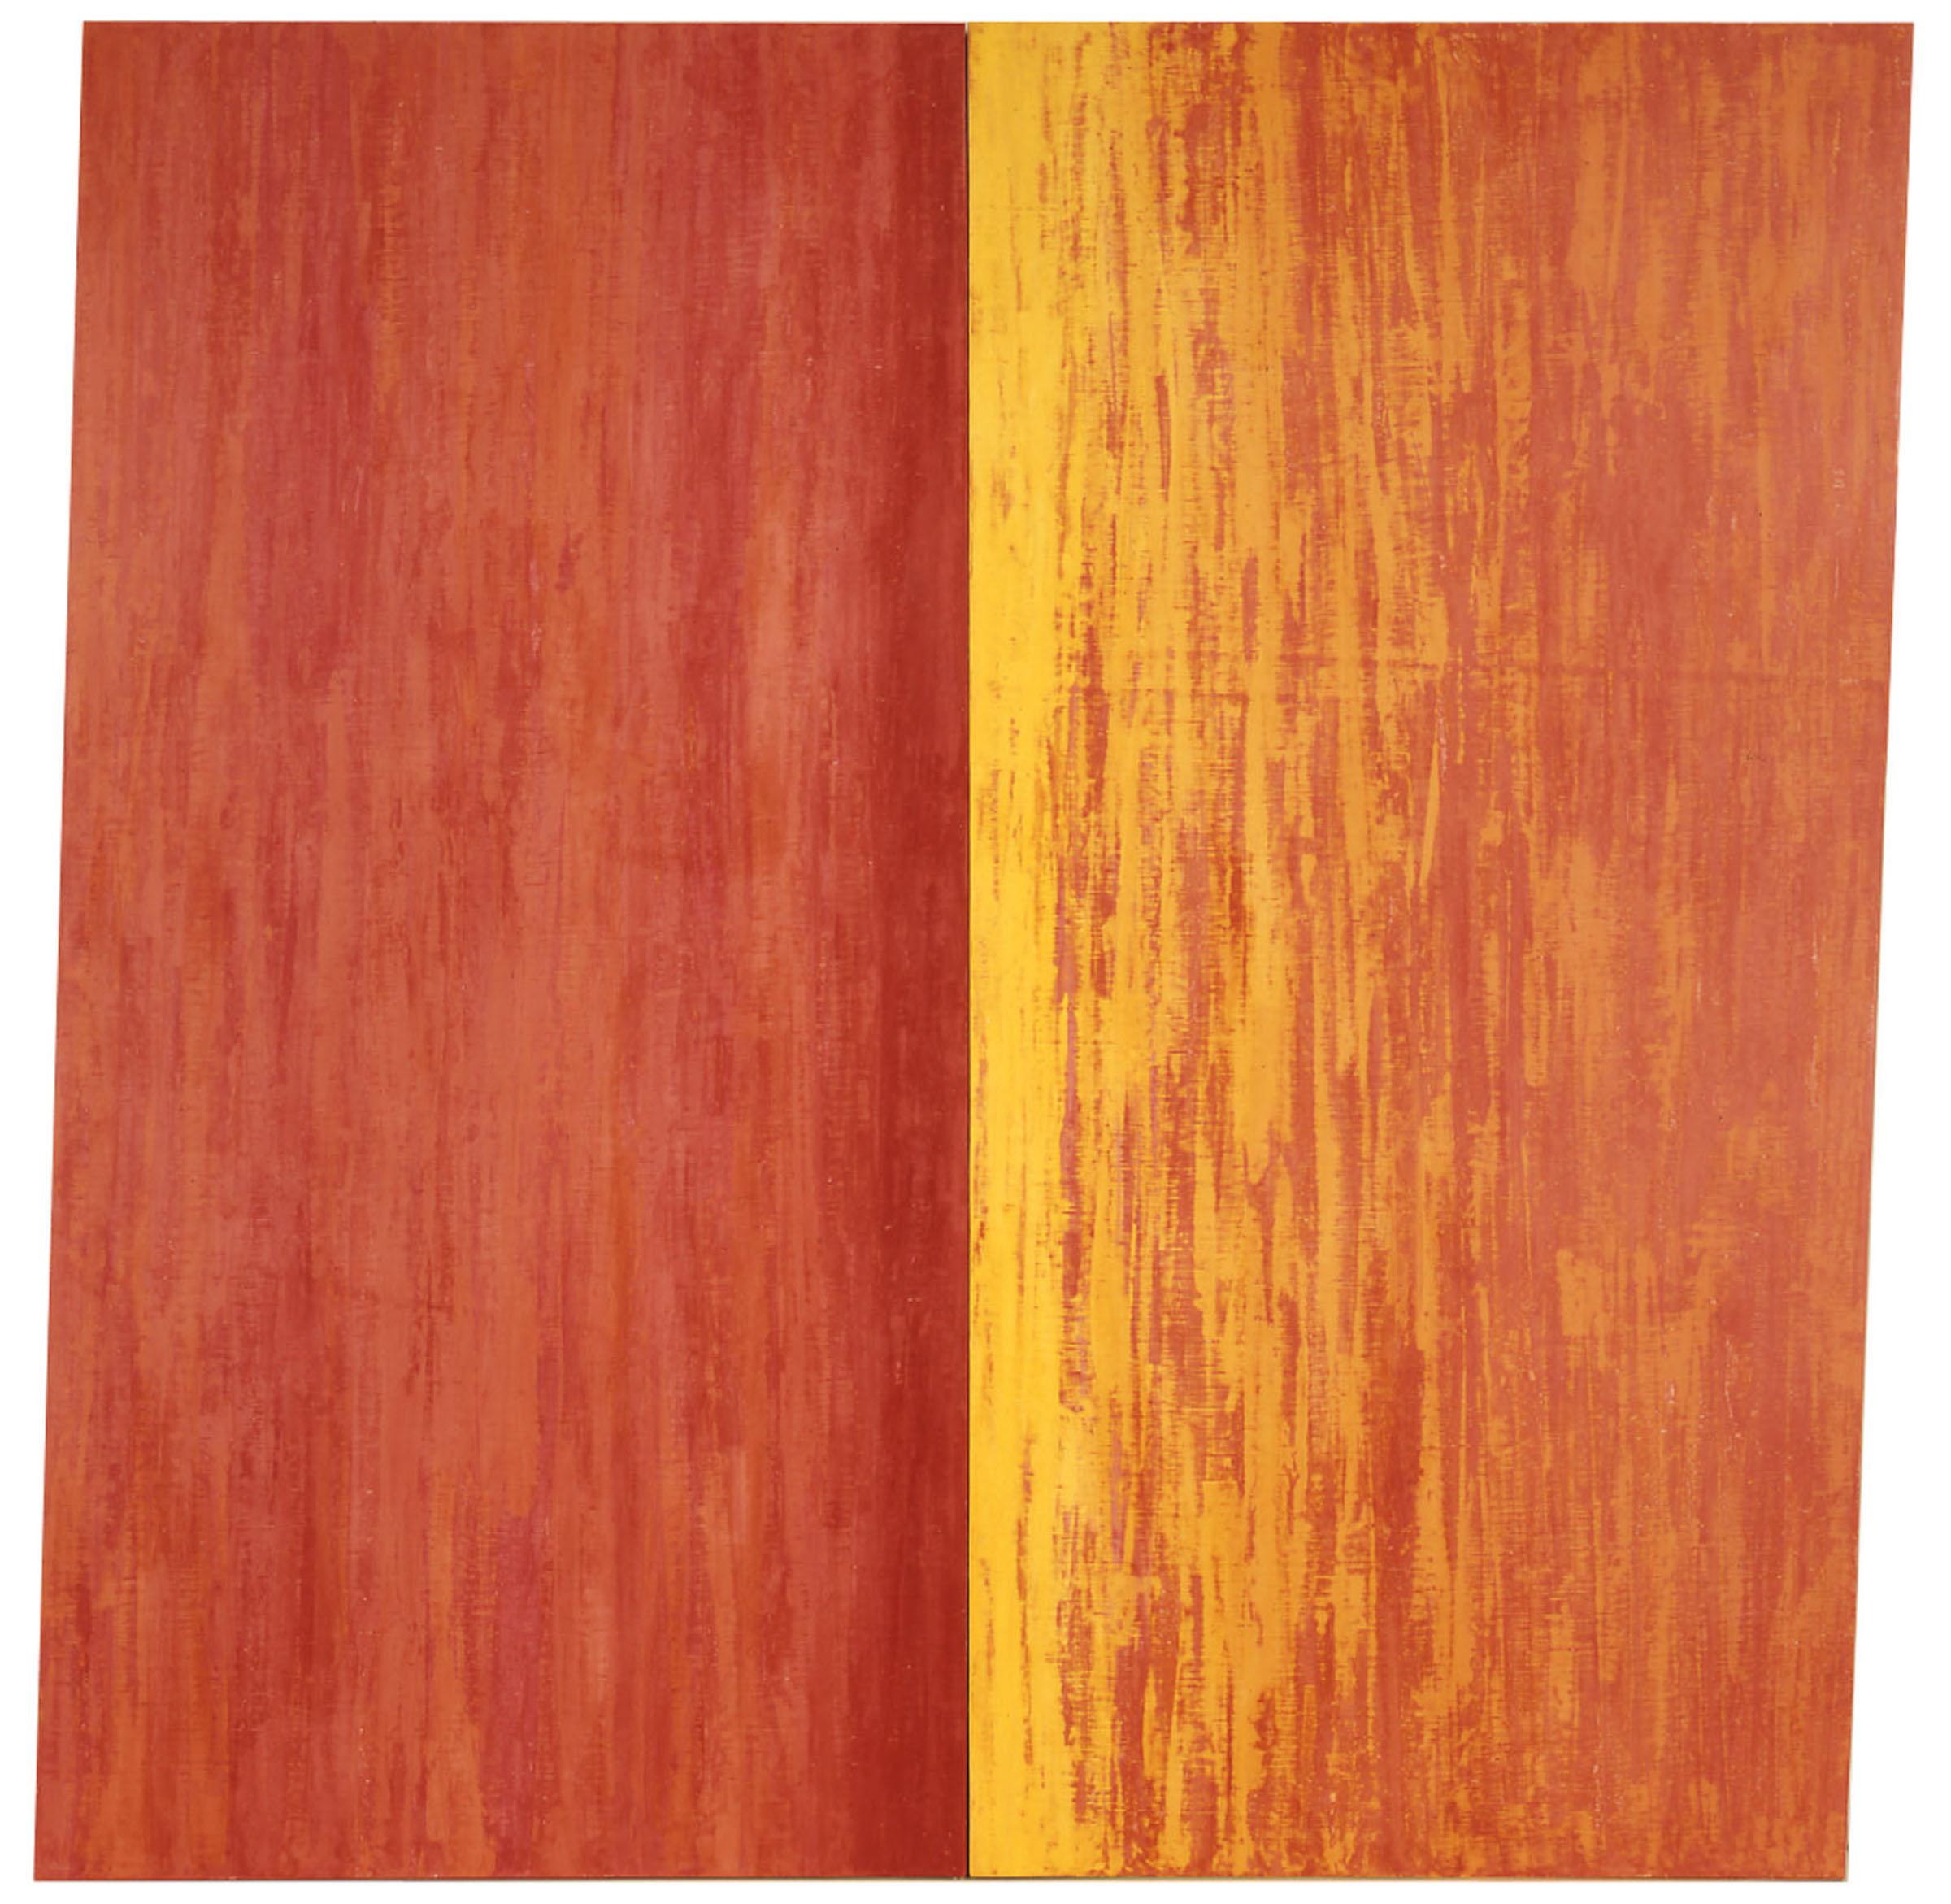 Ieve (diptych) - Painting by Francisca Sutil